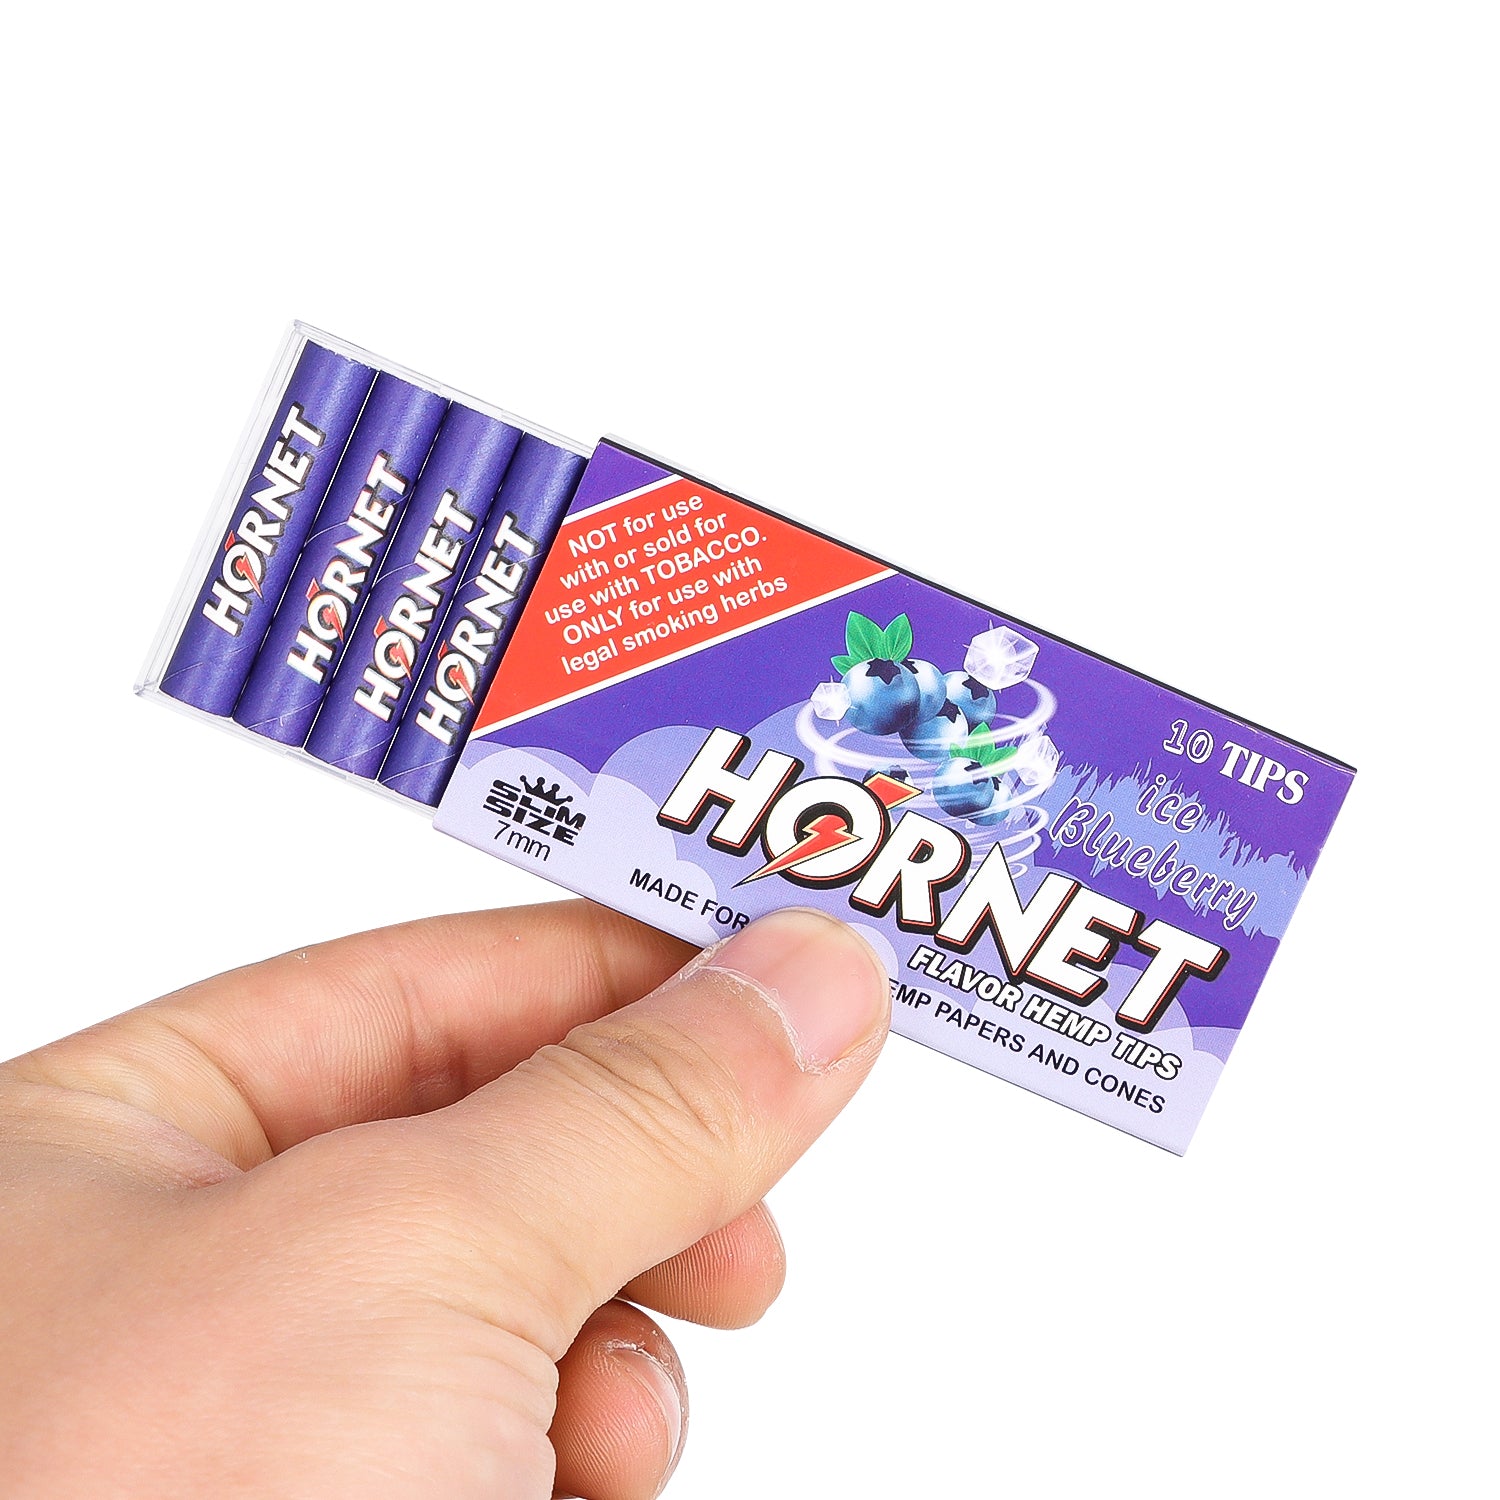 HORNET Blueberry Flavors Filter Tips with Flavored Pop, 7 mm Filter Tips, 10 Tips / Pack 24 Packs / Box